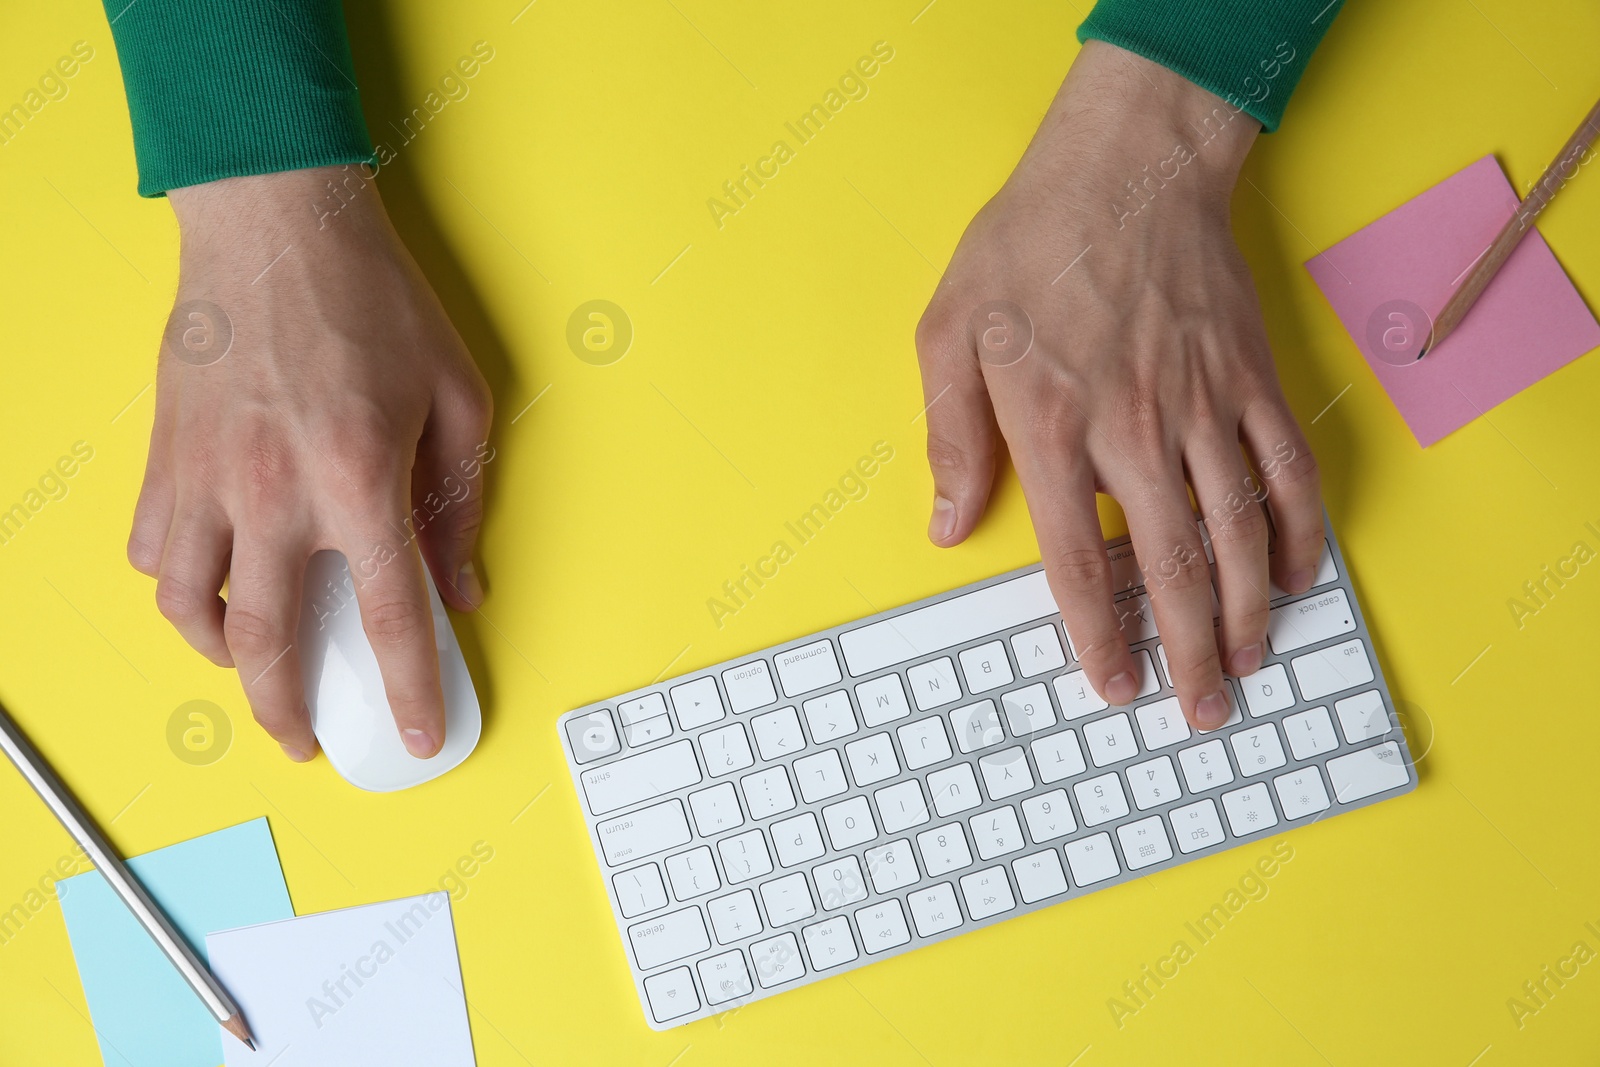 Photo of Man working with mouse, computer keyboard and stationery at yellow table, top view